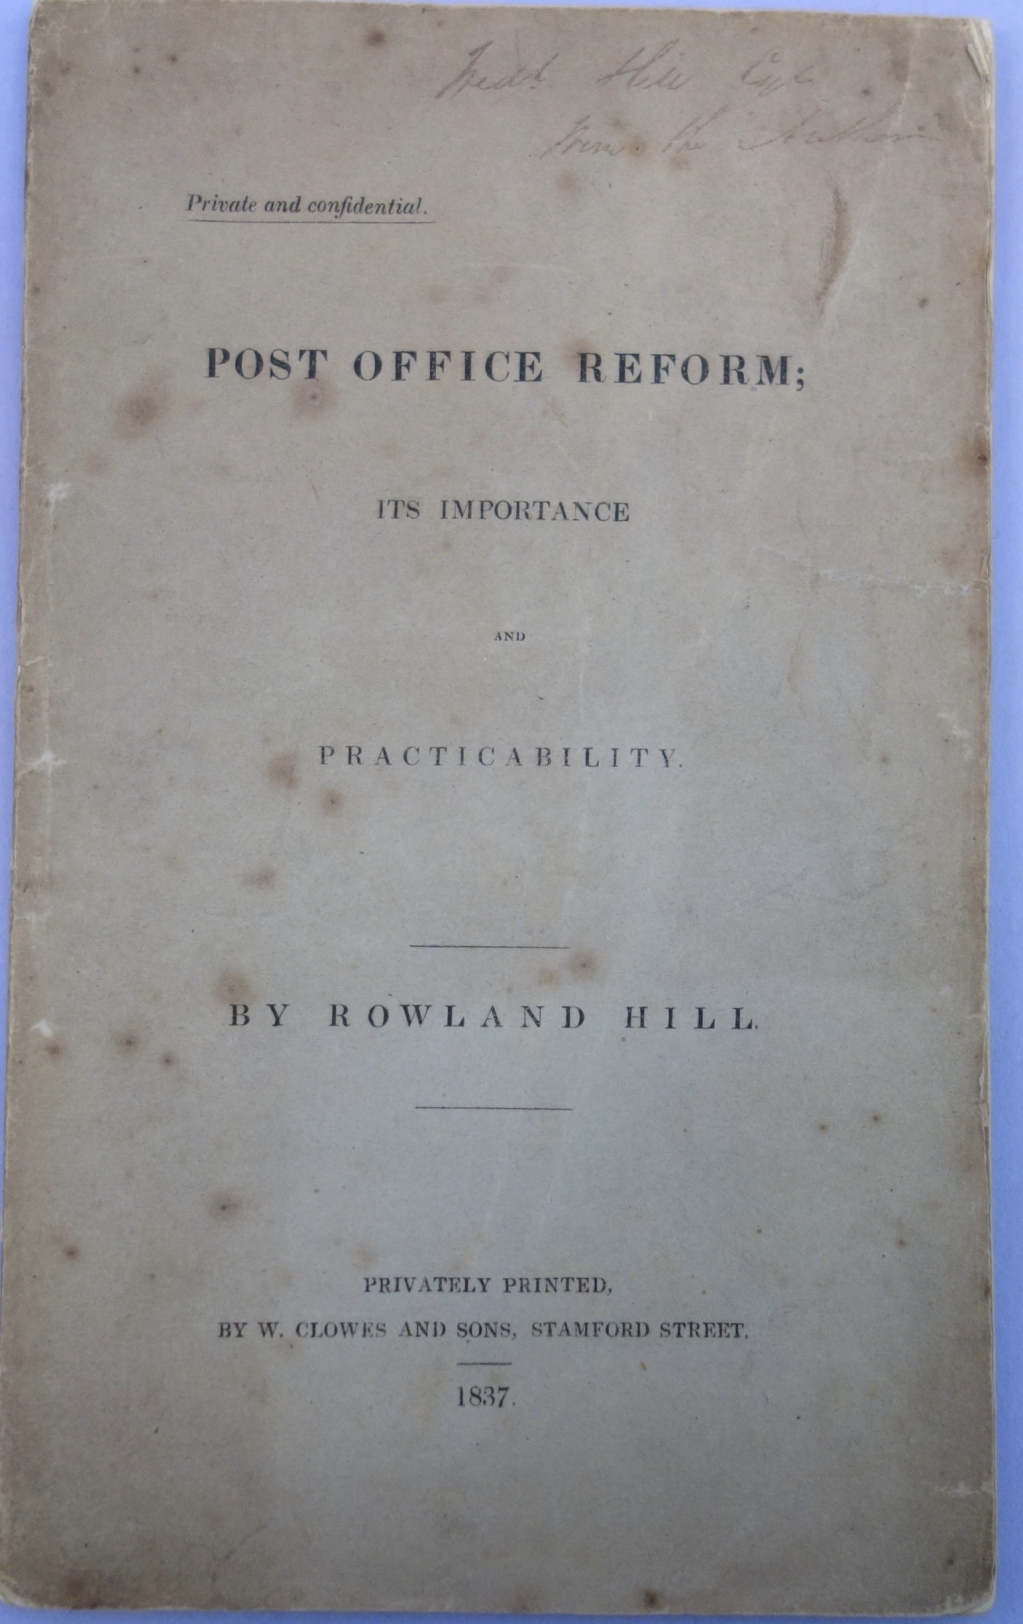 Inscribed copy of the first edition of Rowland Hill's Post Office Reform